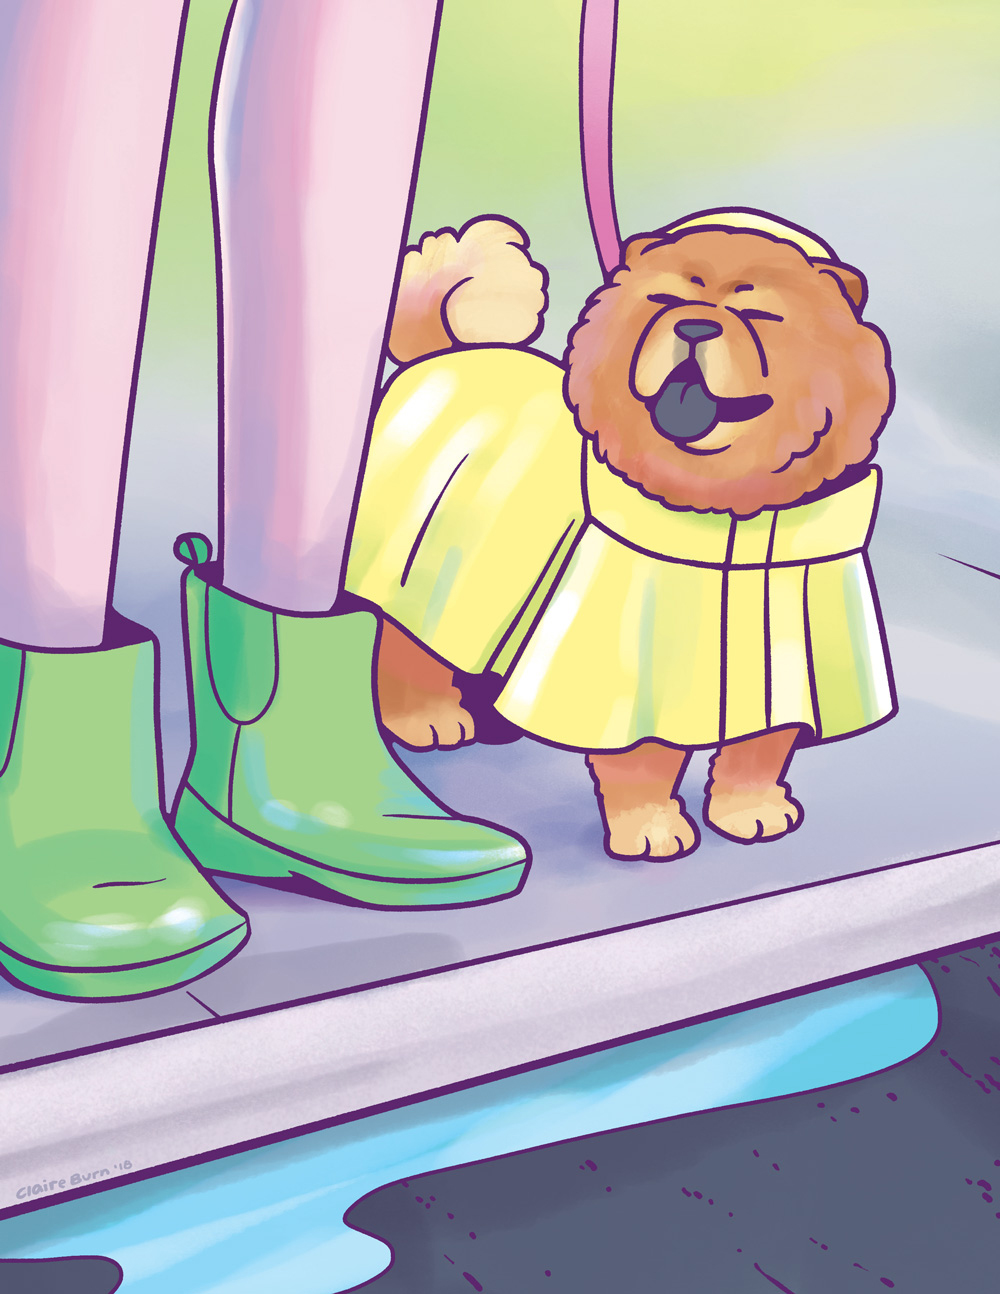 A chow chow puppy in a yellow raincoat, next to its owner, who is wearing green boots.